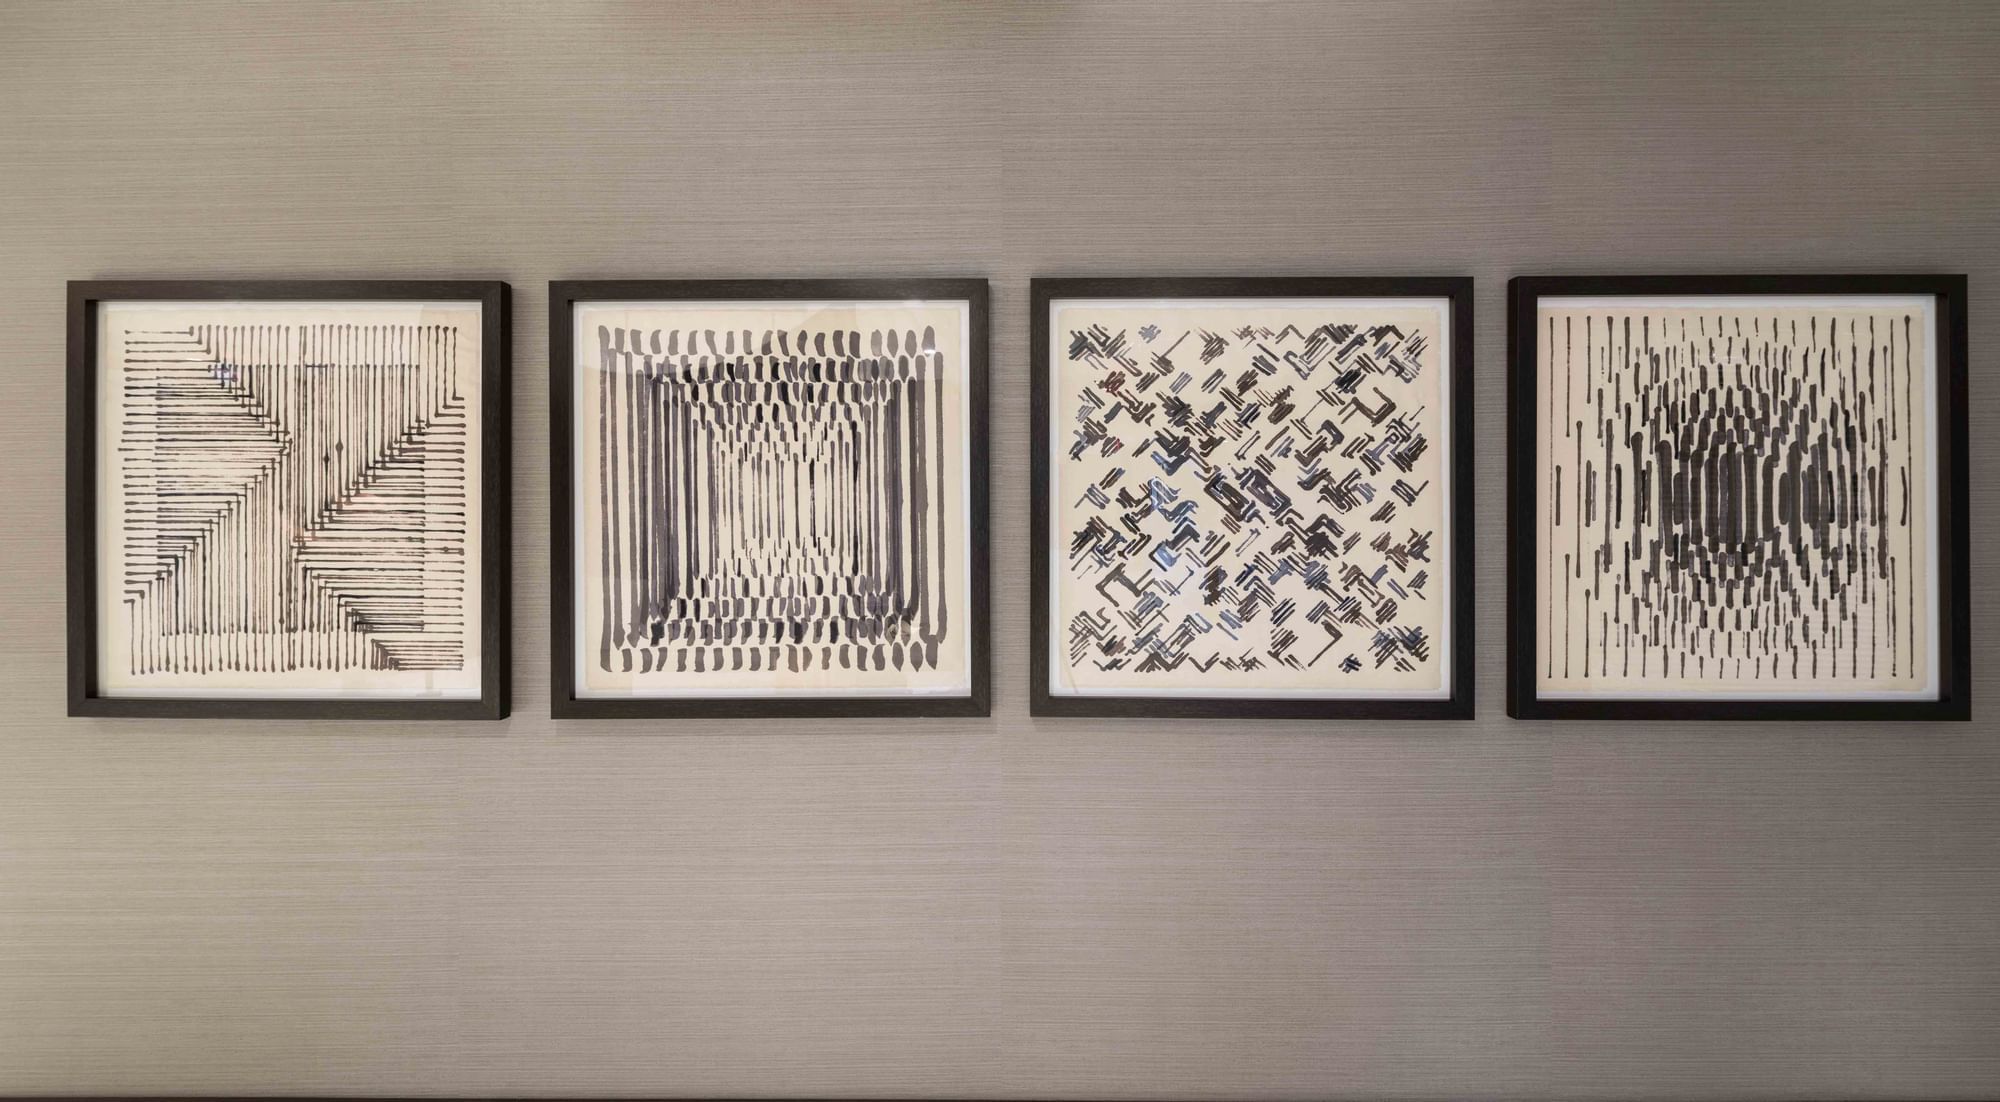 Four pieces of geometric abstract art hanging on wall